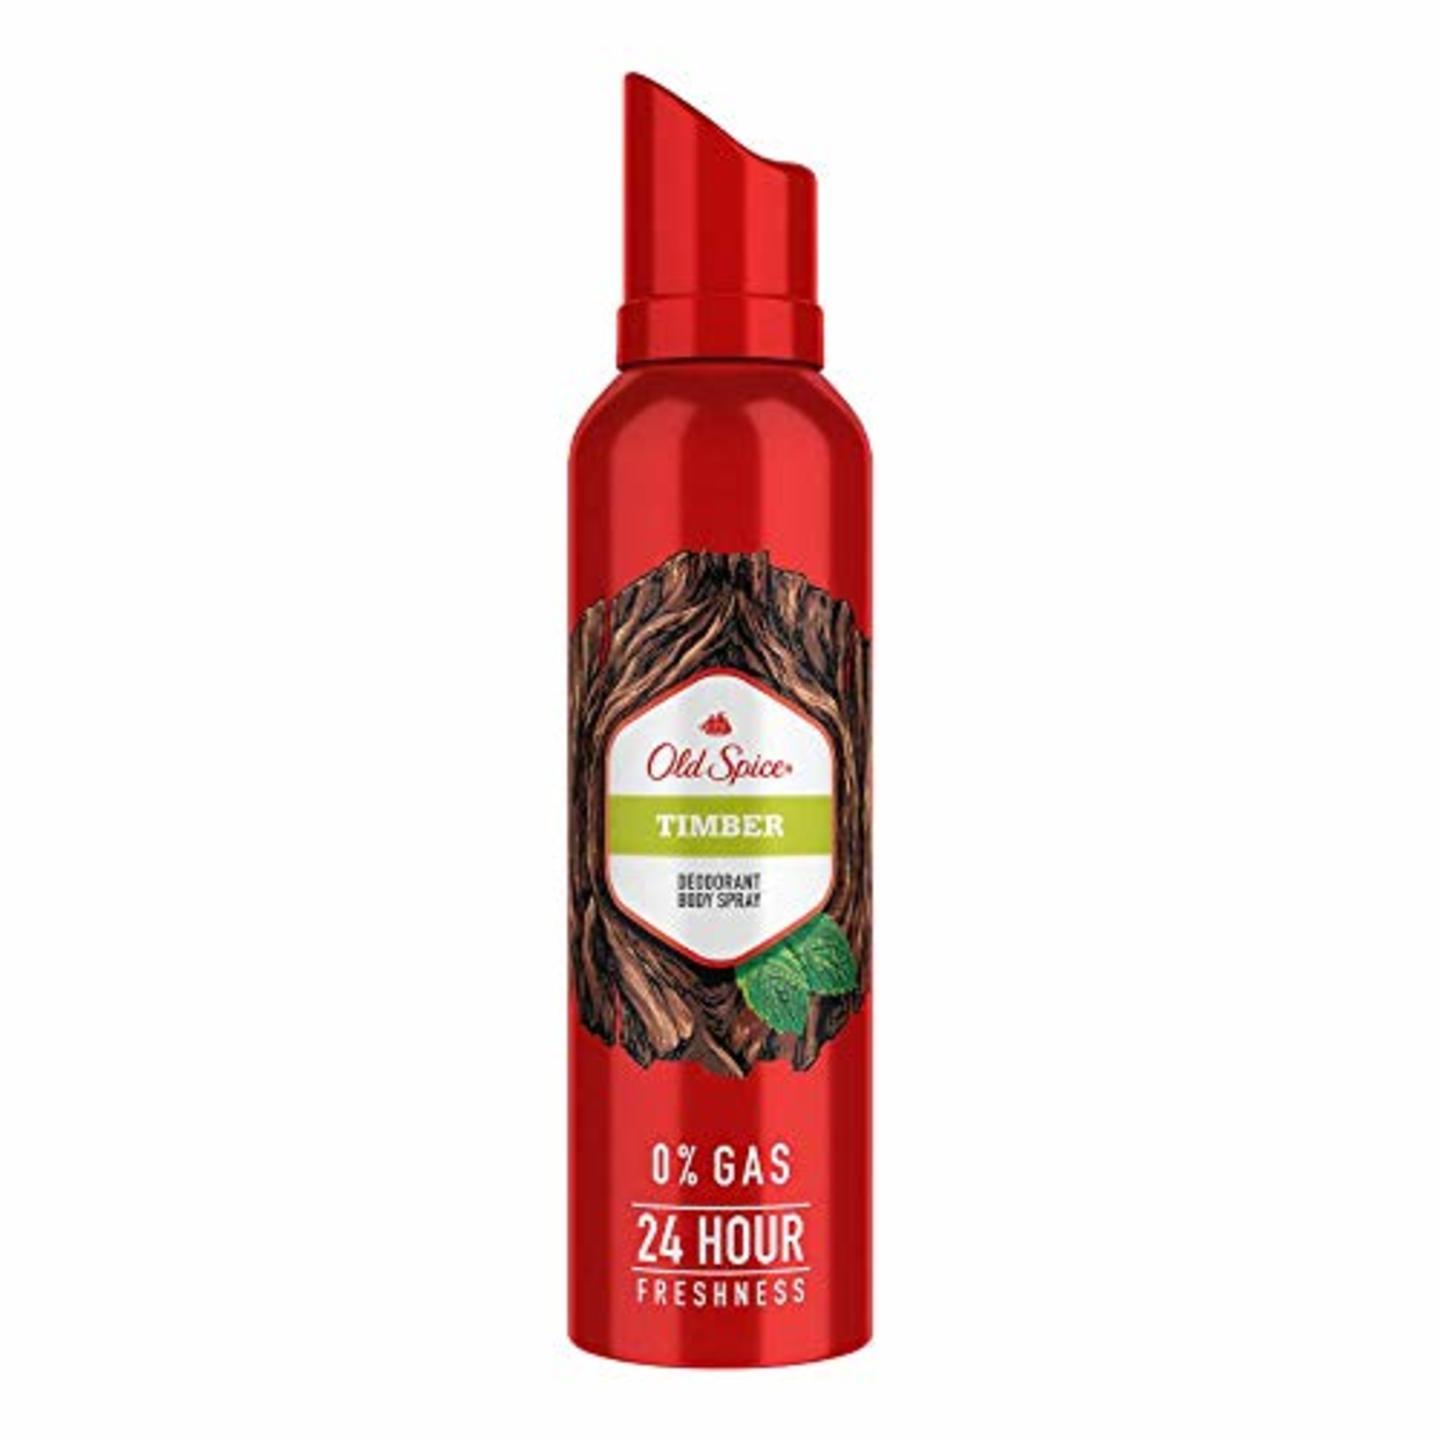 Old Spice Timber No Gas Deodorant Body Spray Perfume for Men 140 ml